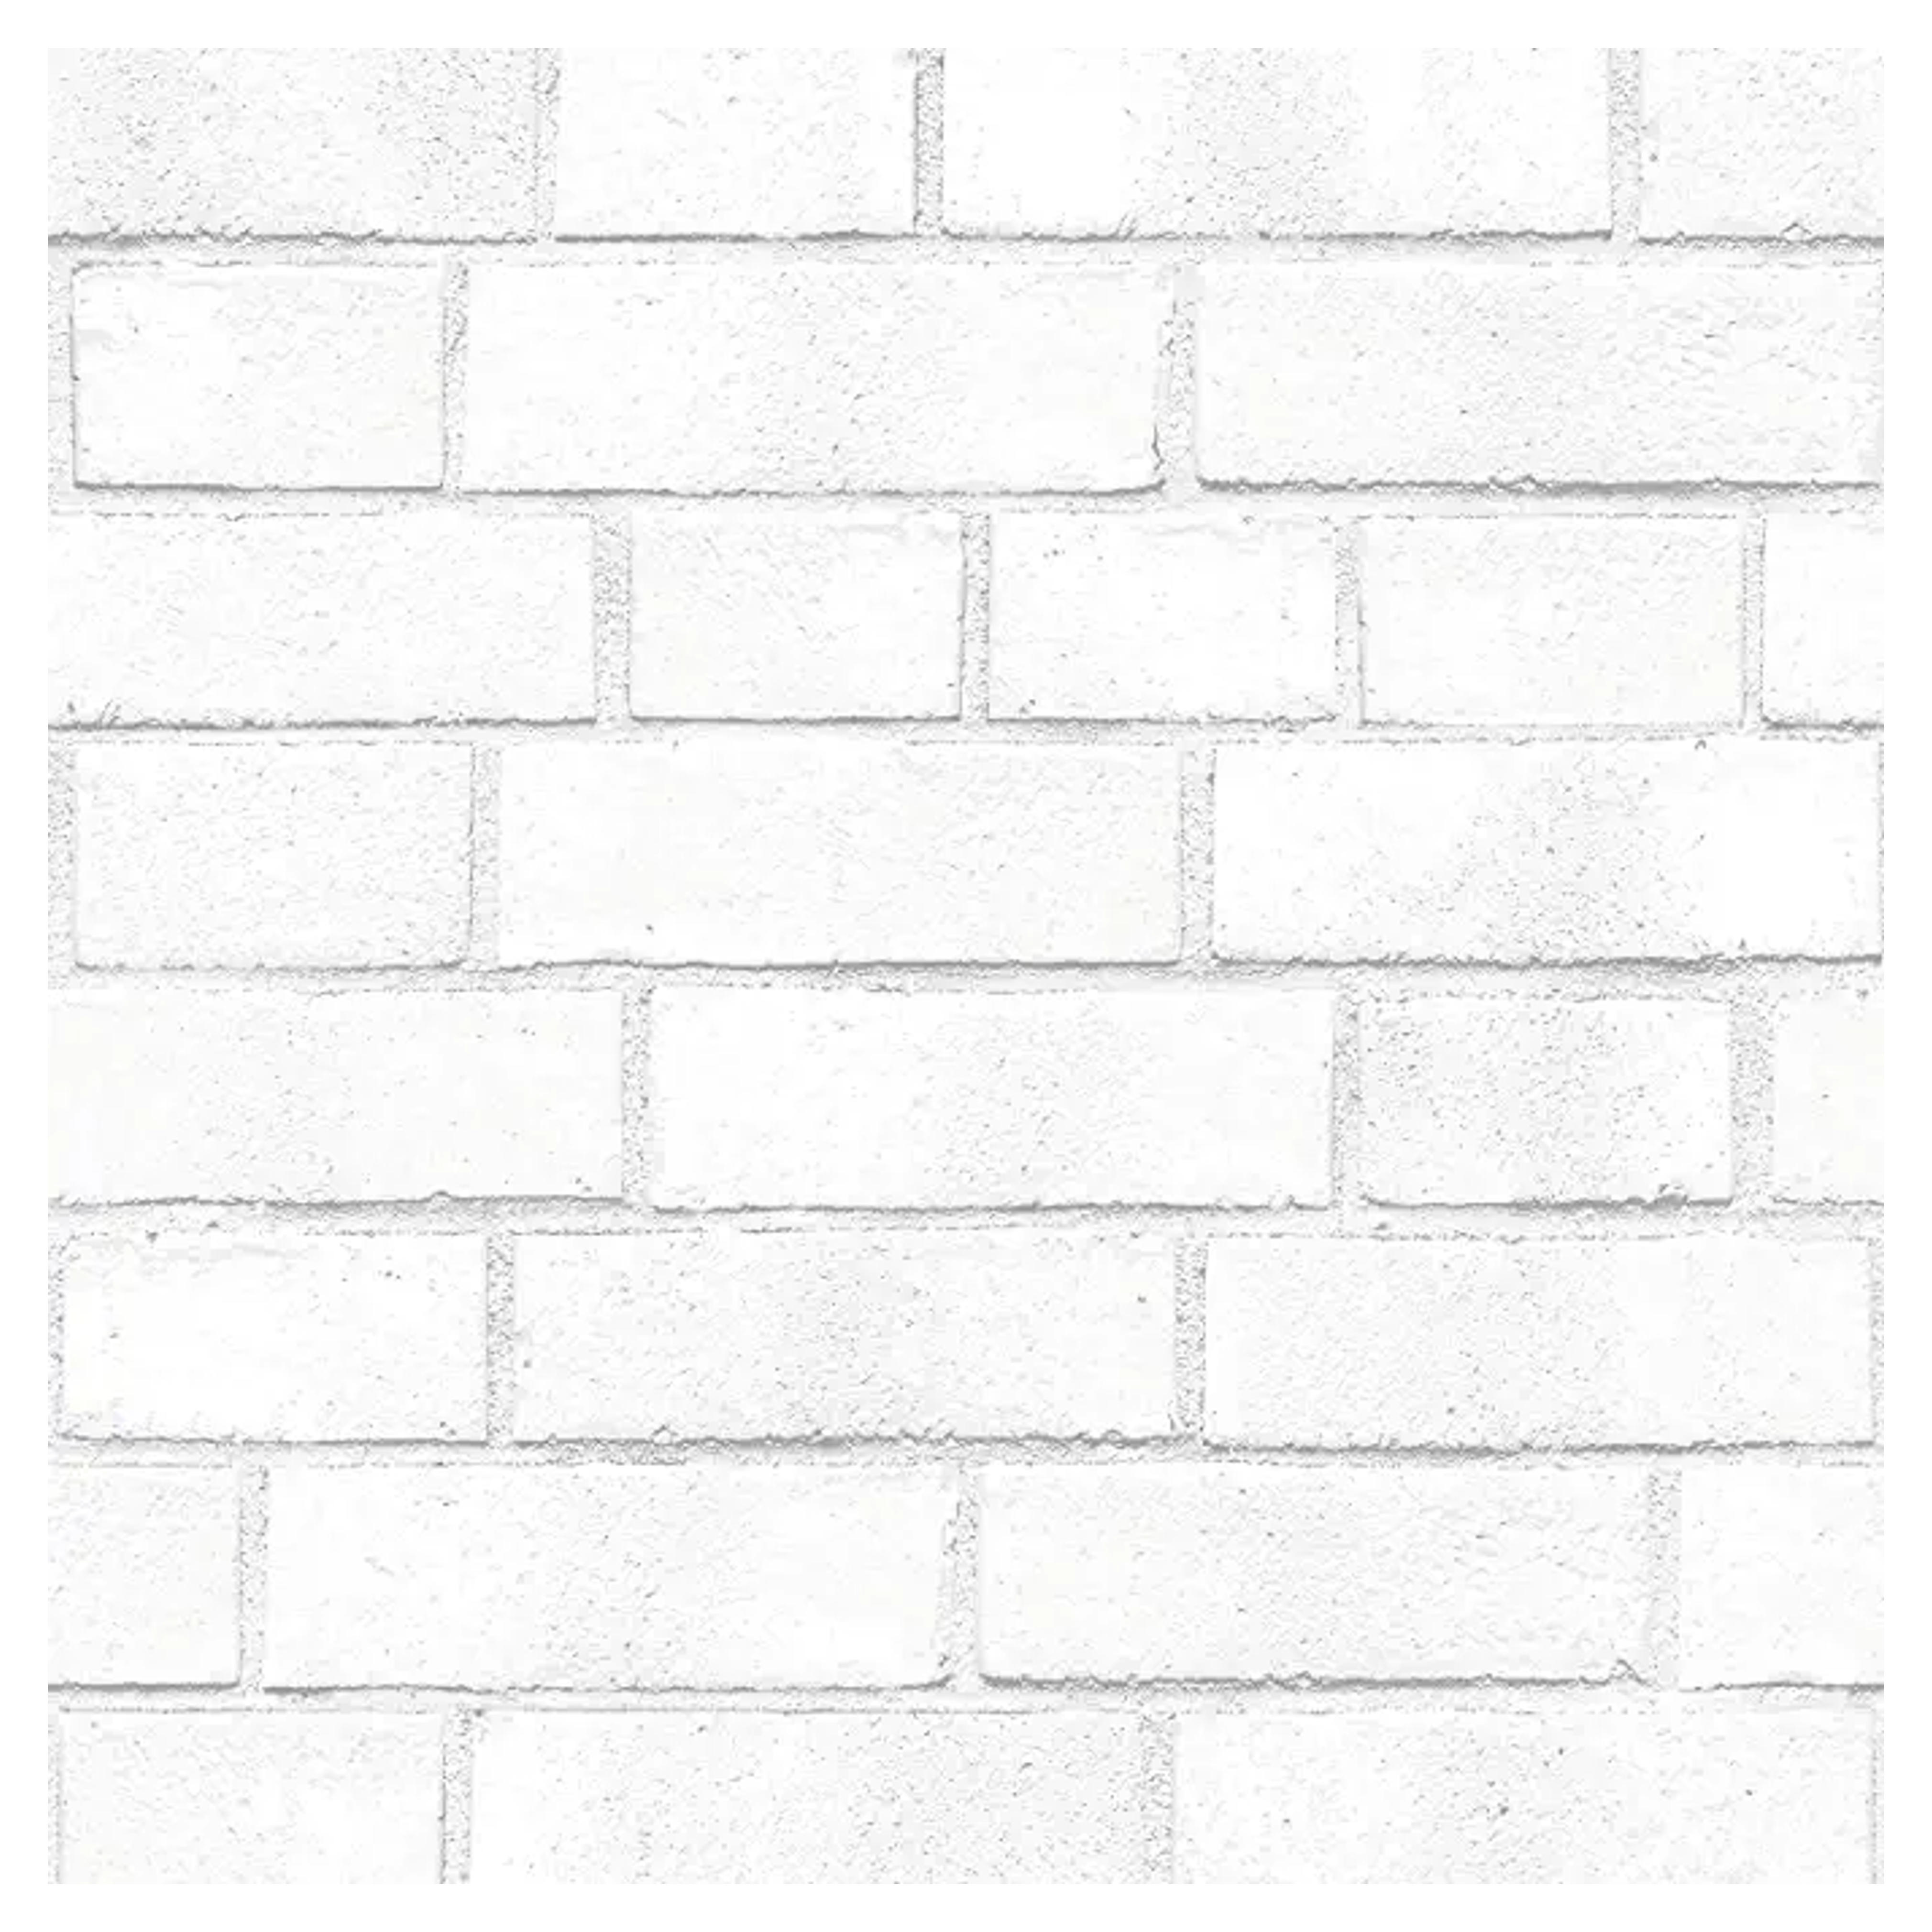 Amazon.com: Tempaper White Brick Removable Peel and Stick Wallpaper, 20.5 in X 16.5 ft, Made in the USA : Clothing, Shoes & Jewelry